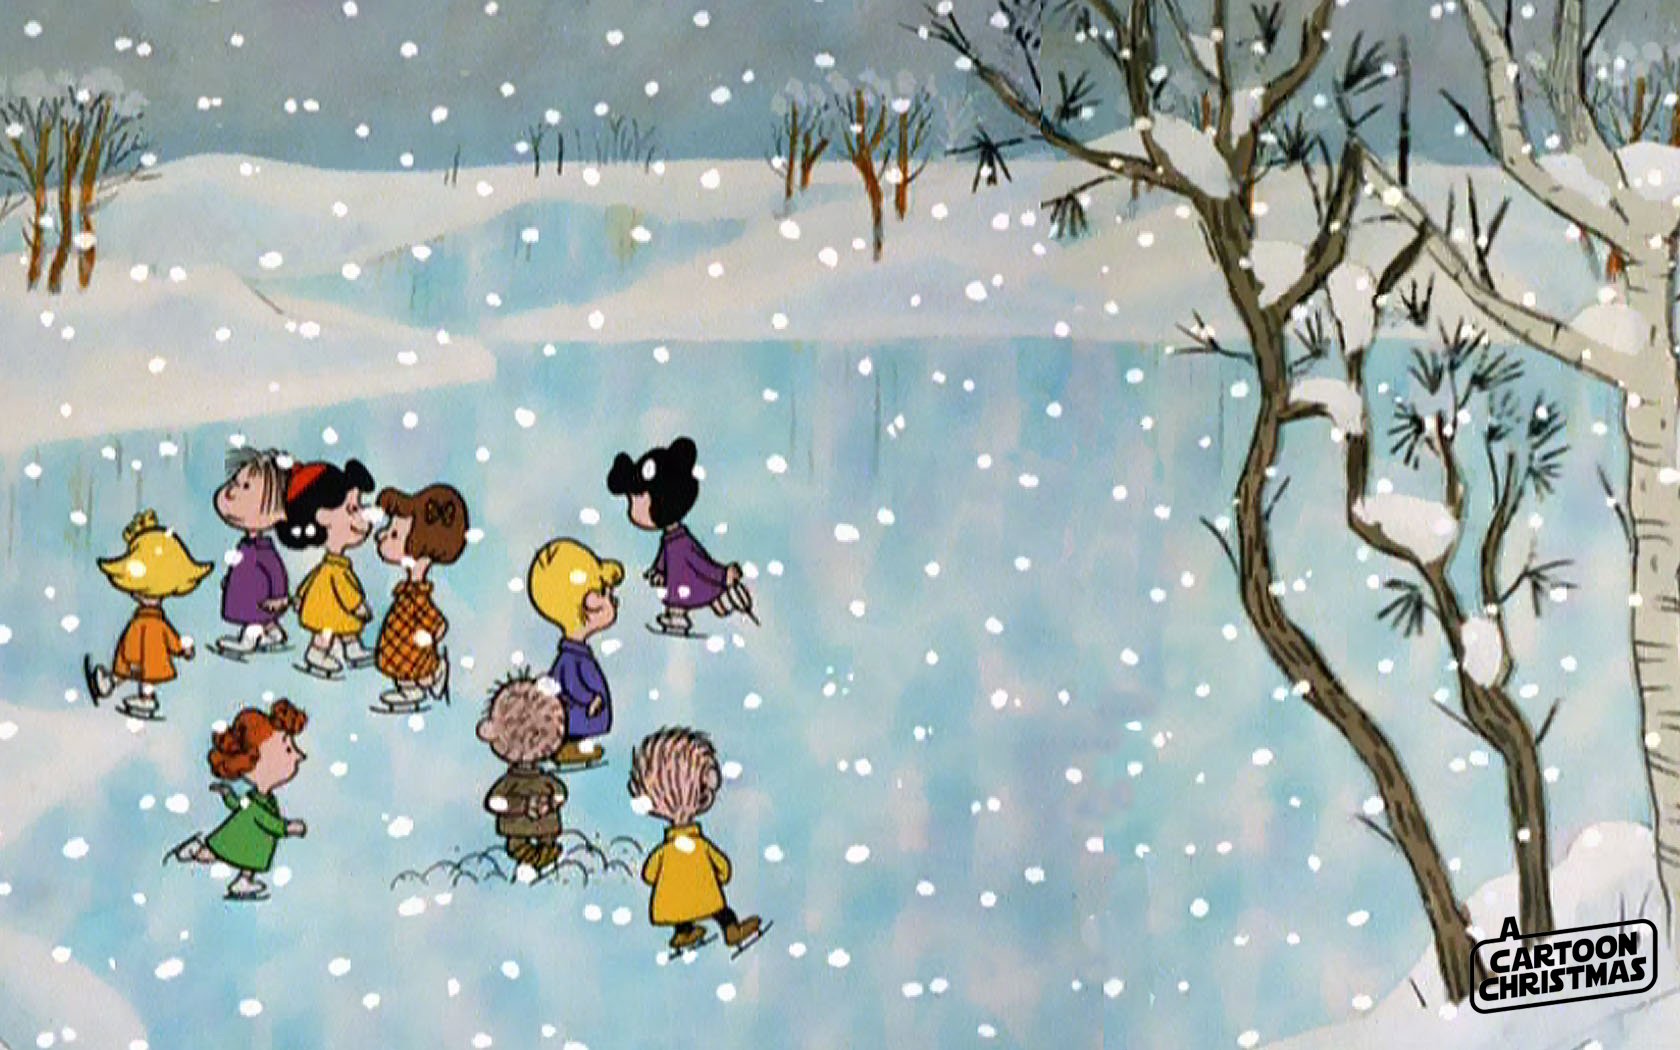  Charlie Brown Chrismas Wallpapers right here    A Cartoon Christmas 1680x1050